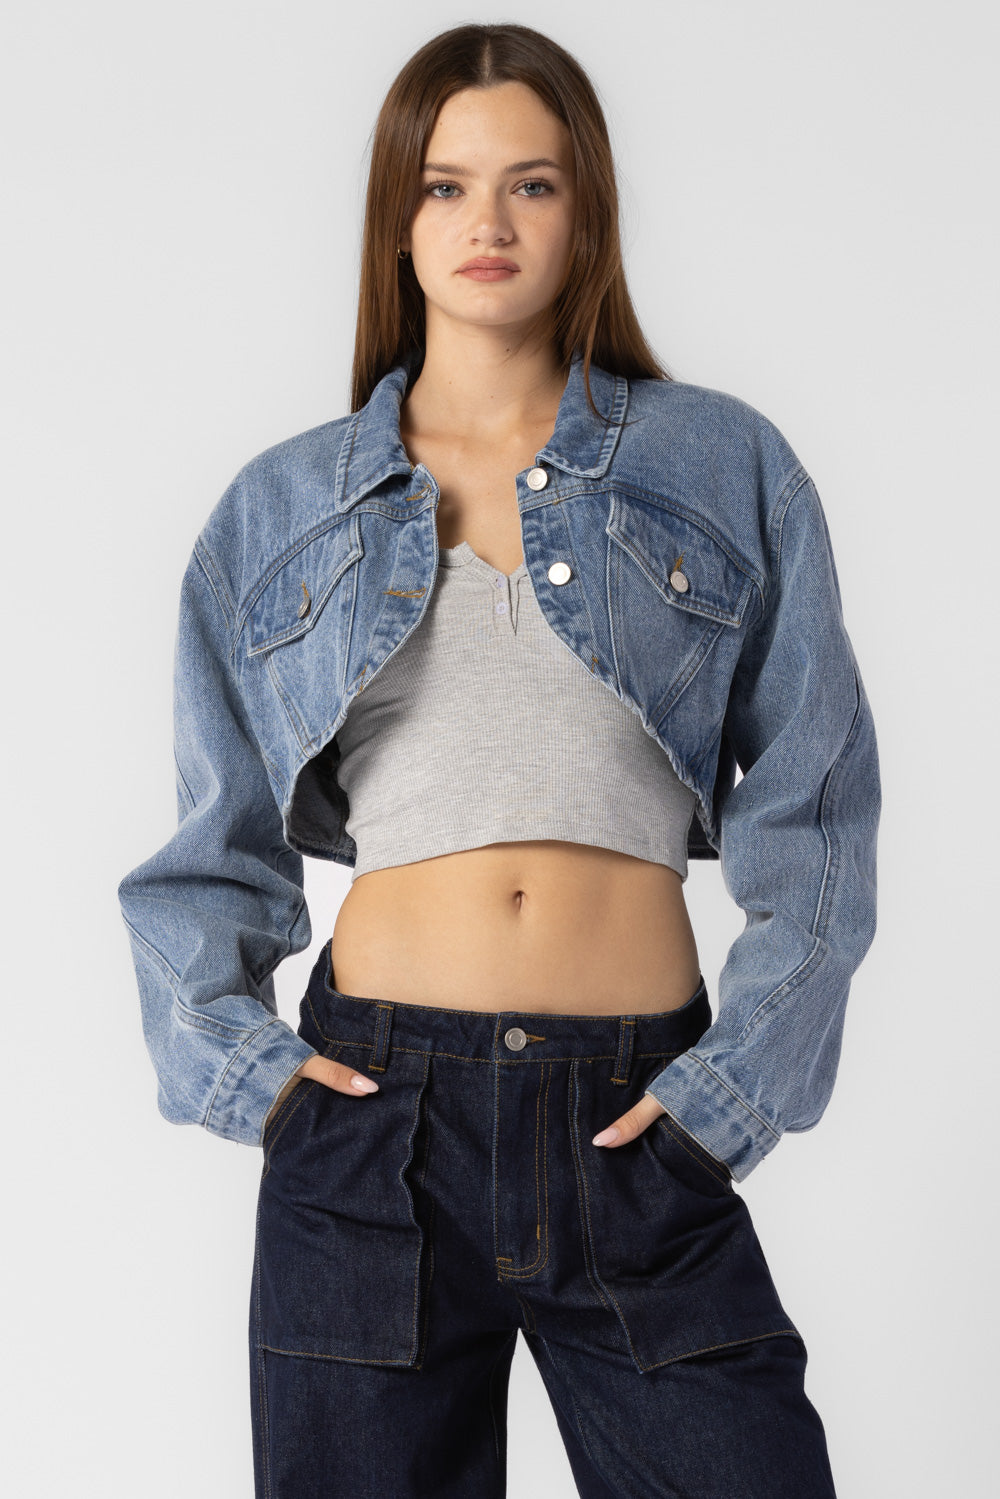 A model wearing a cropped denim jacket against a white wall. 